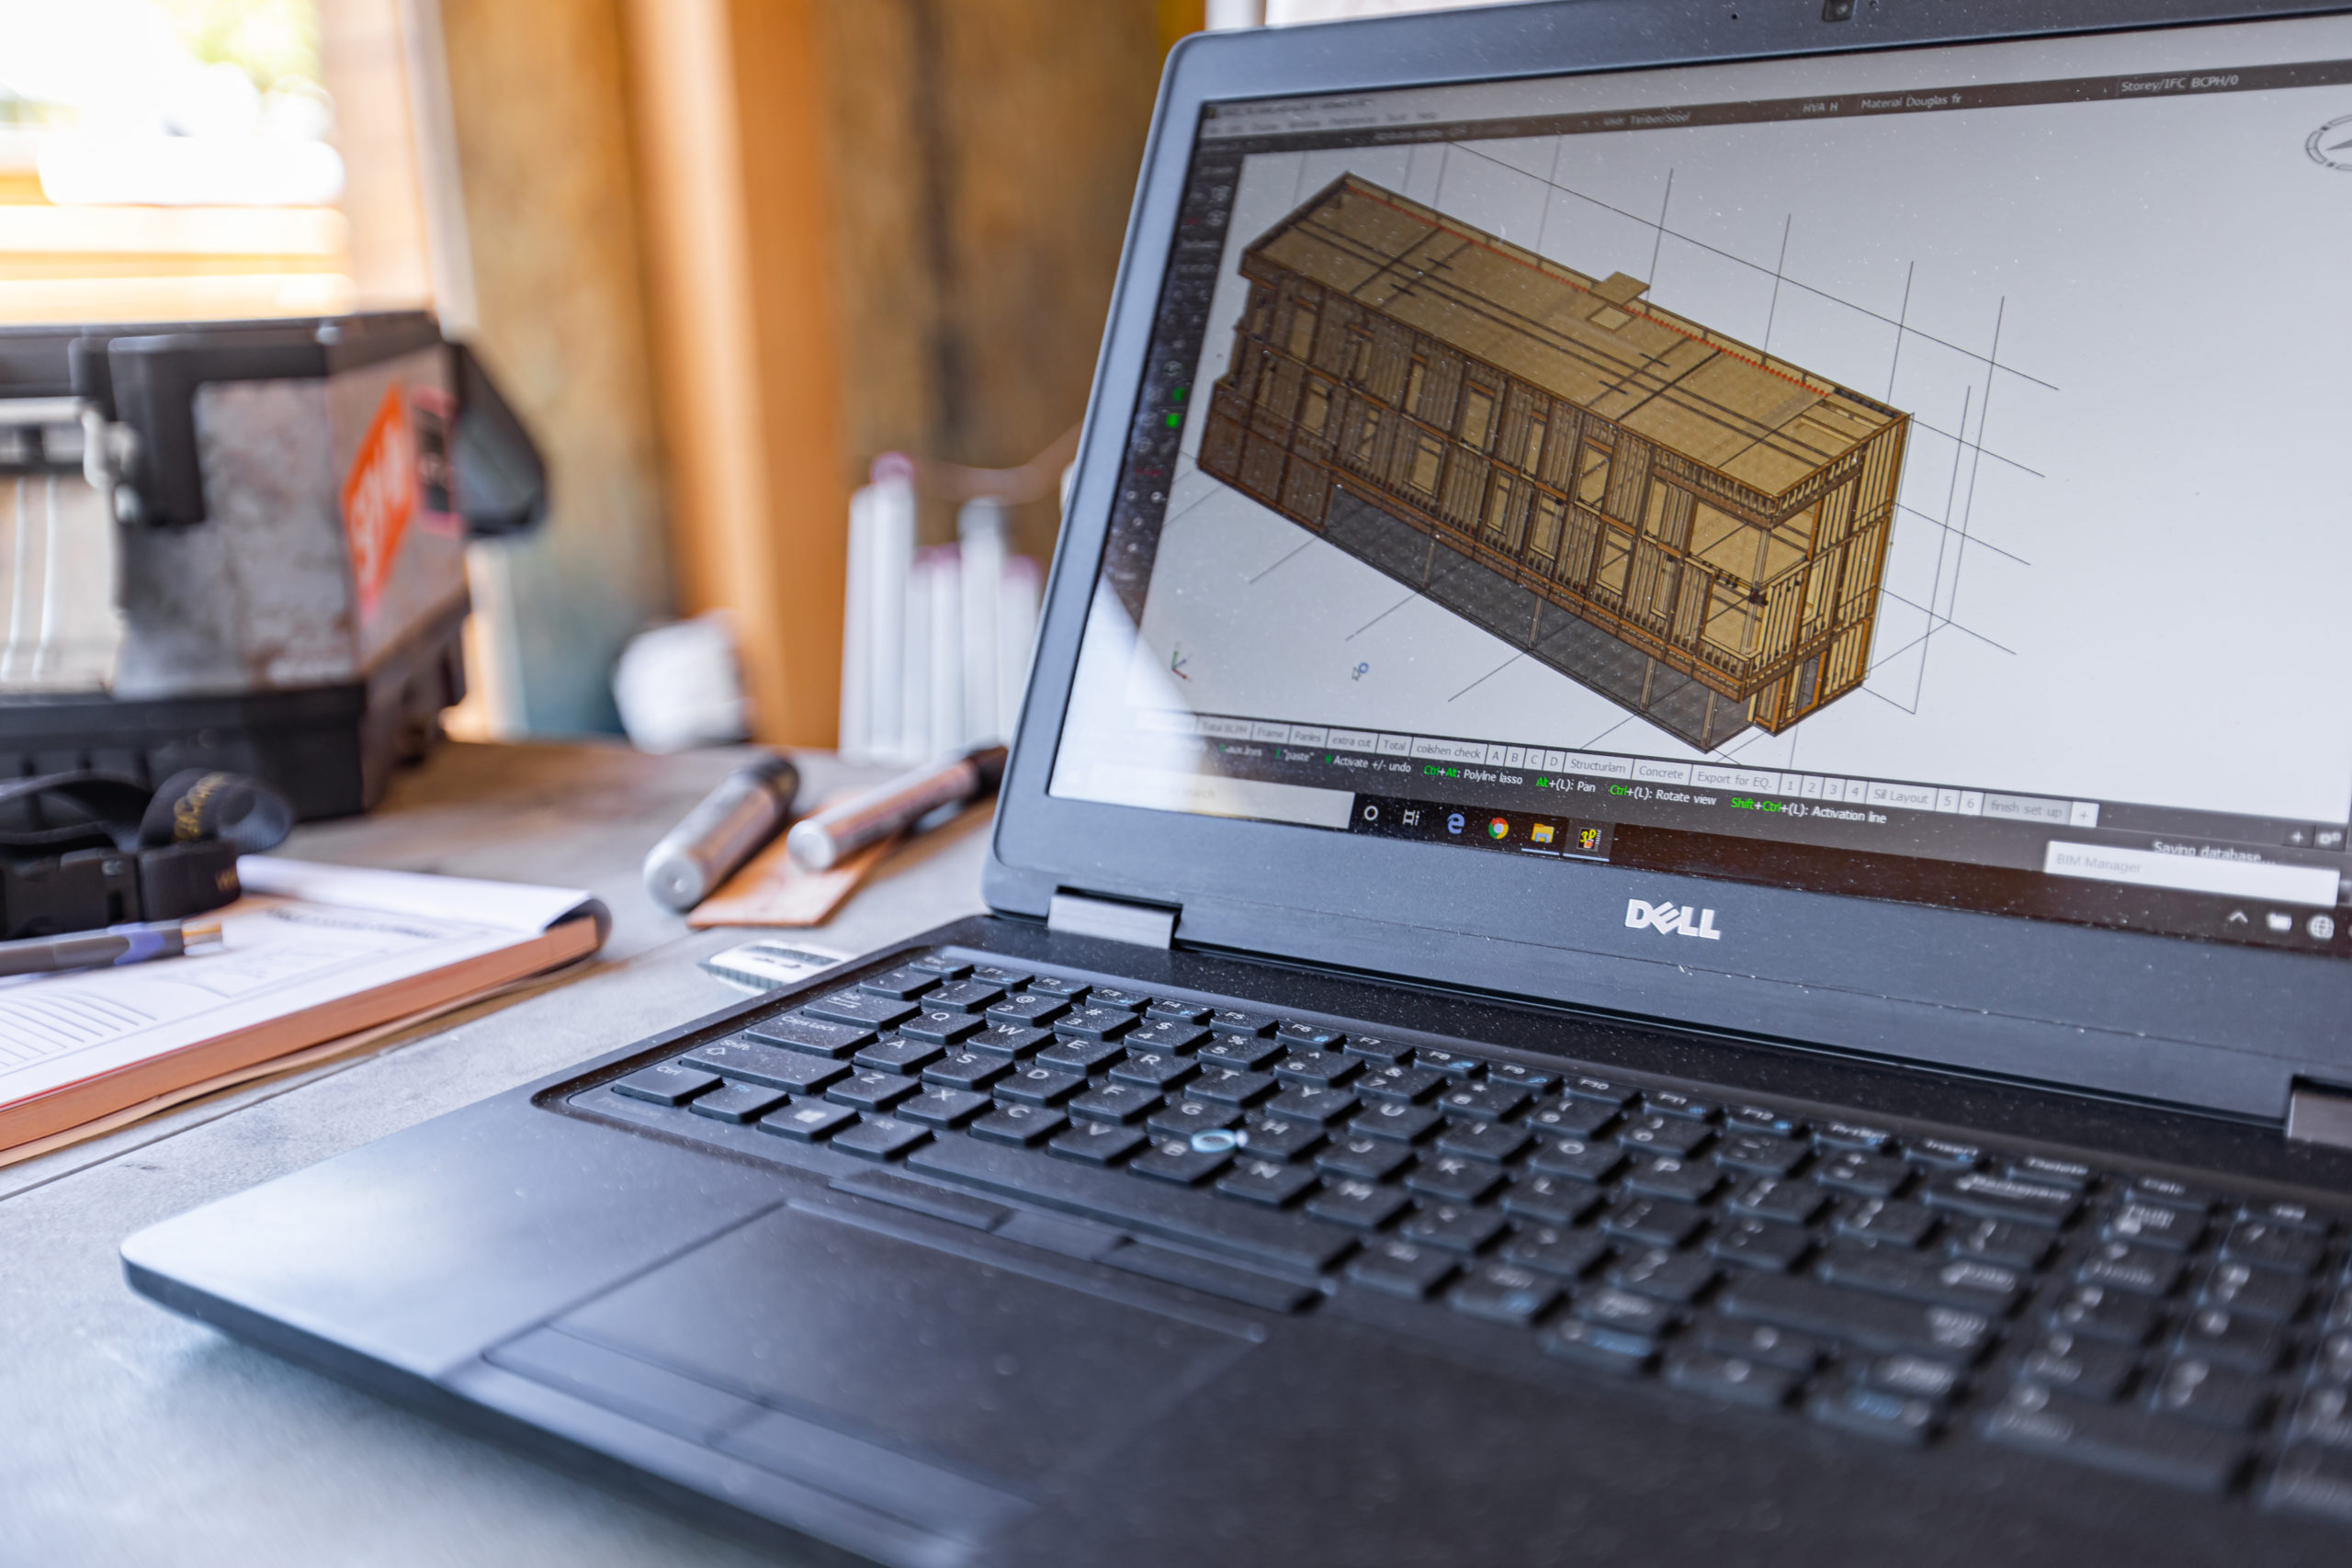 Laptop screen showing a 3D render of a building wood structure.